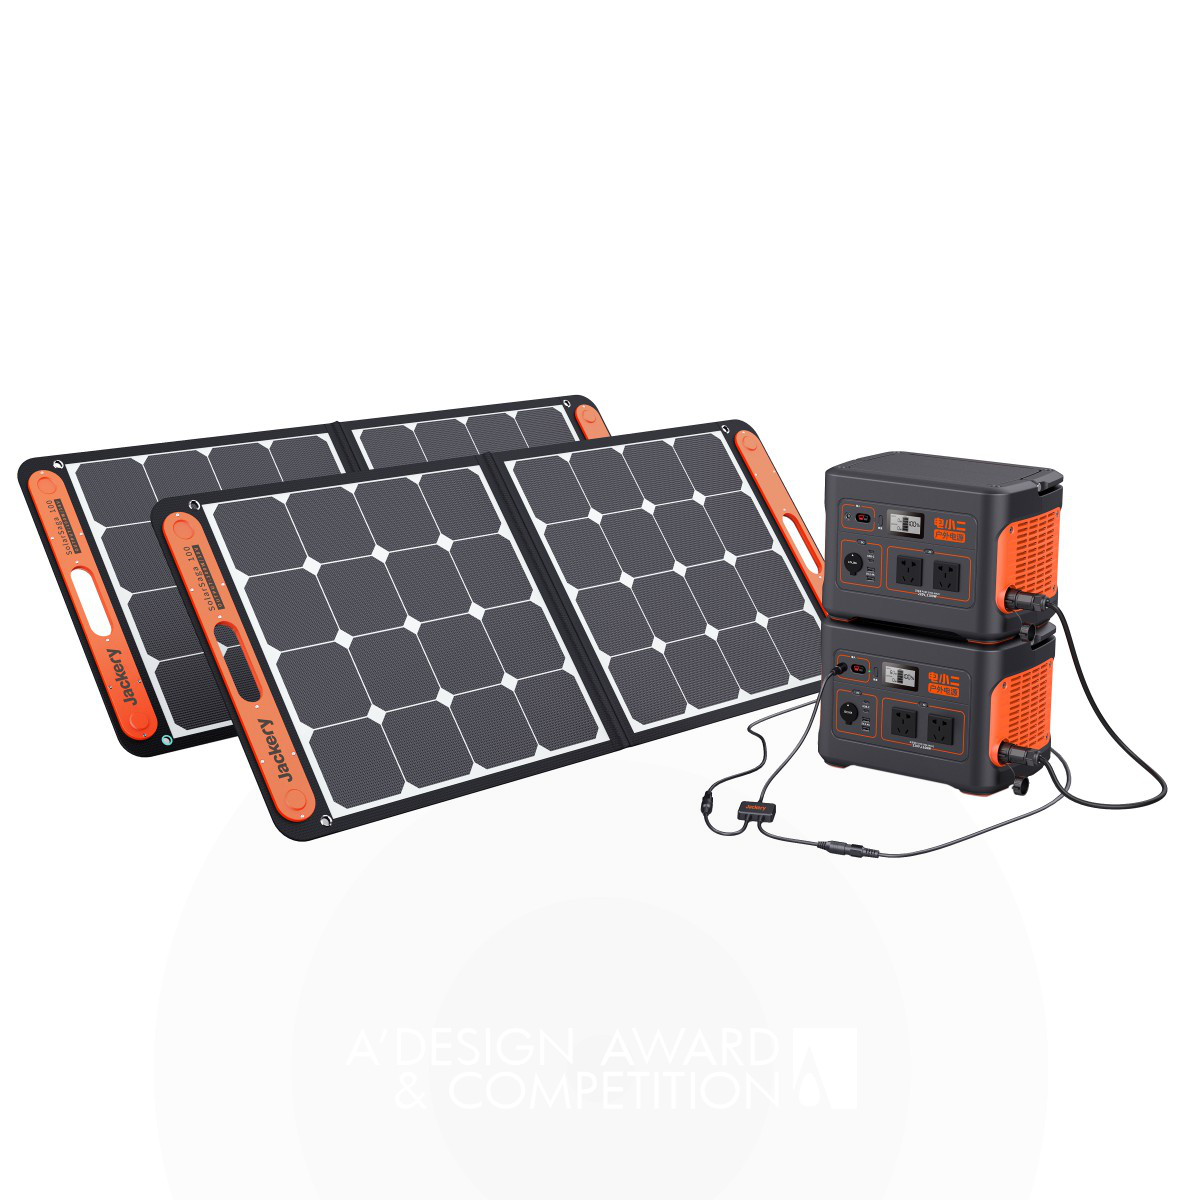 Revolutionary Outdoor Power Supply Redefines Portable Energy Solutions